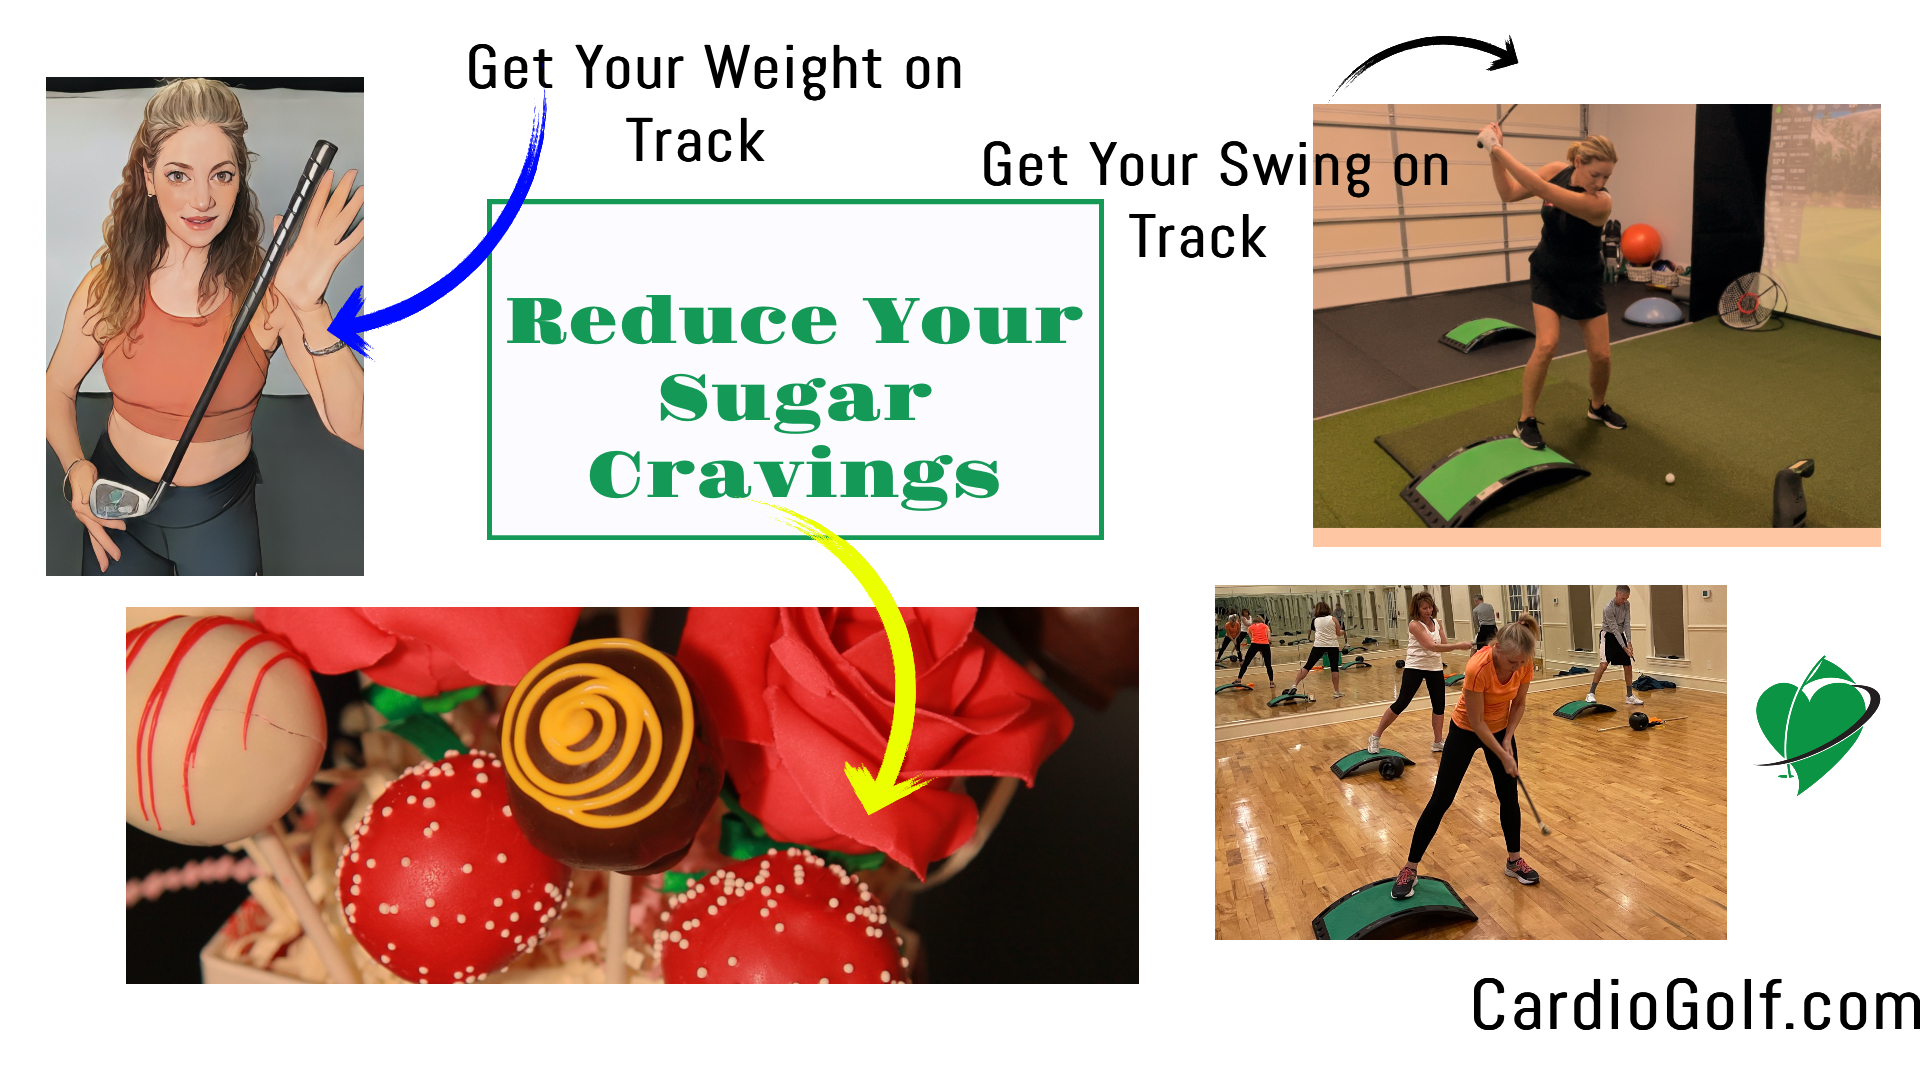 Reduce Your Sugar Cravings with CardioGolf